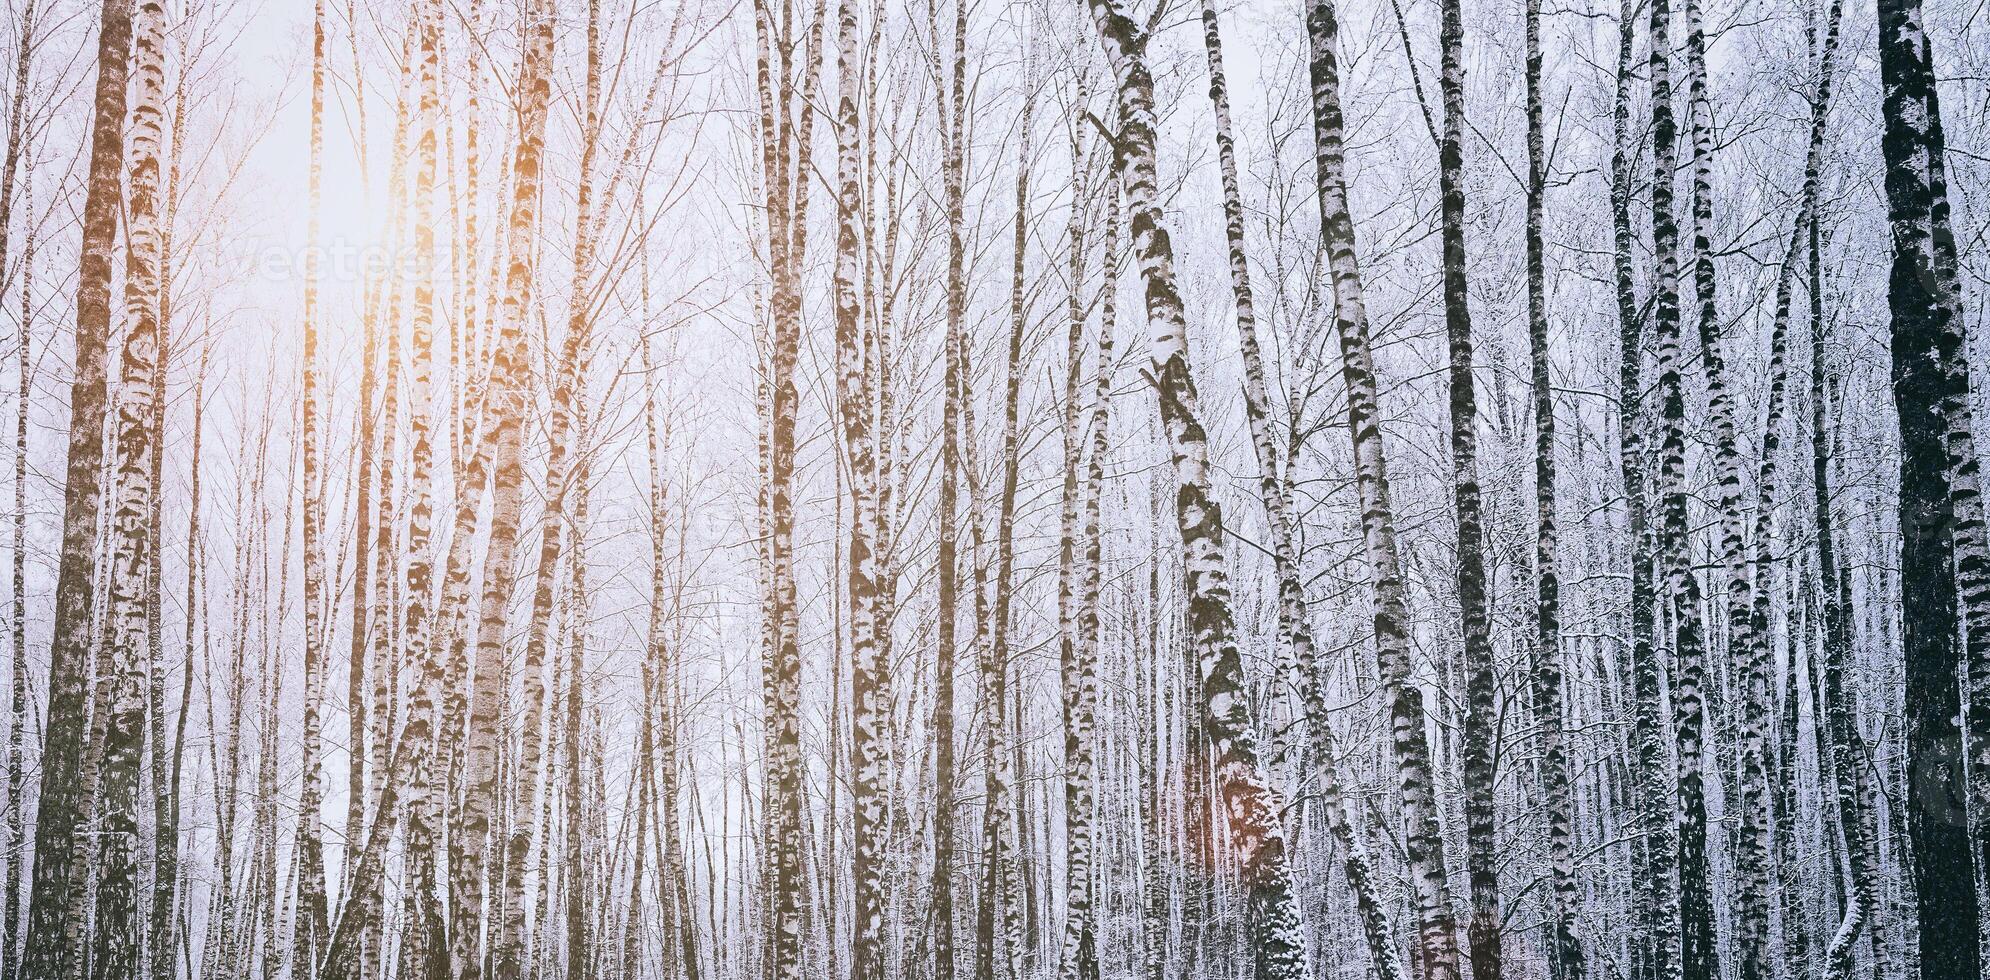 Sunbeams shining through snow-covered birch branches in a birch grove after a snowfall on a winter. Vintage film aesthetic. photo